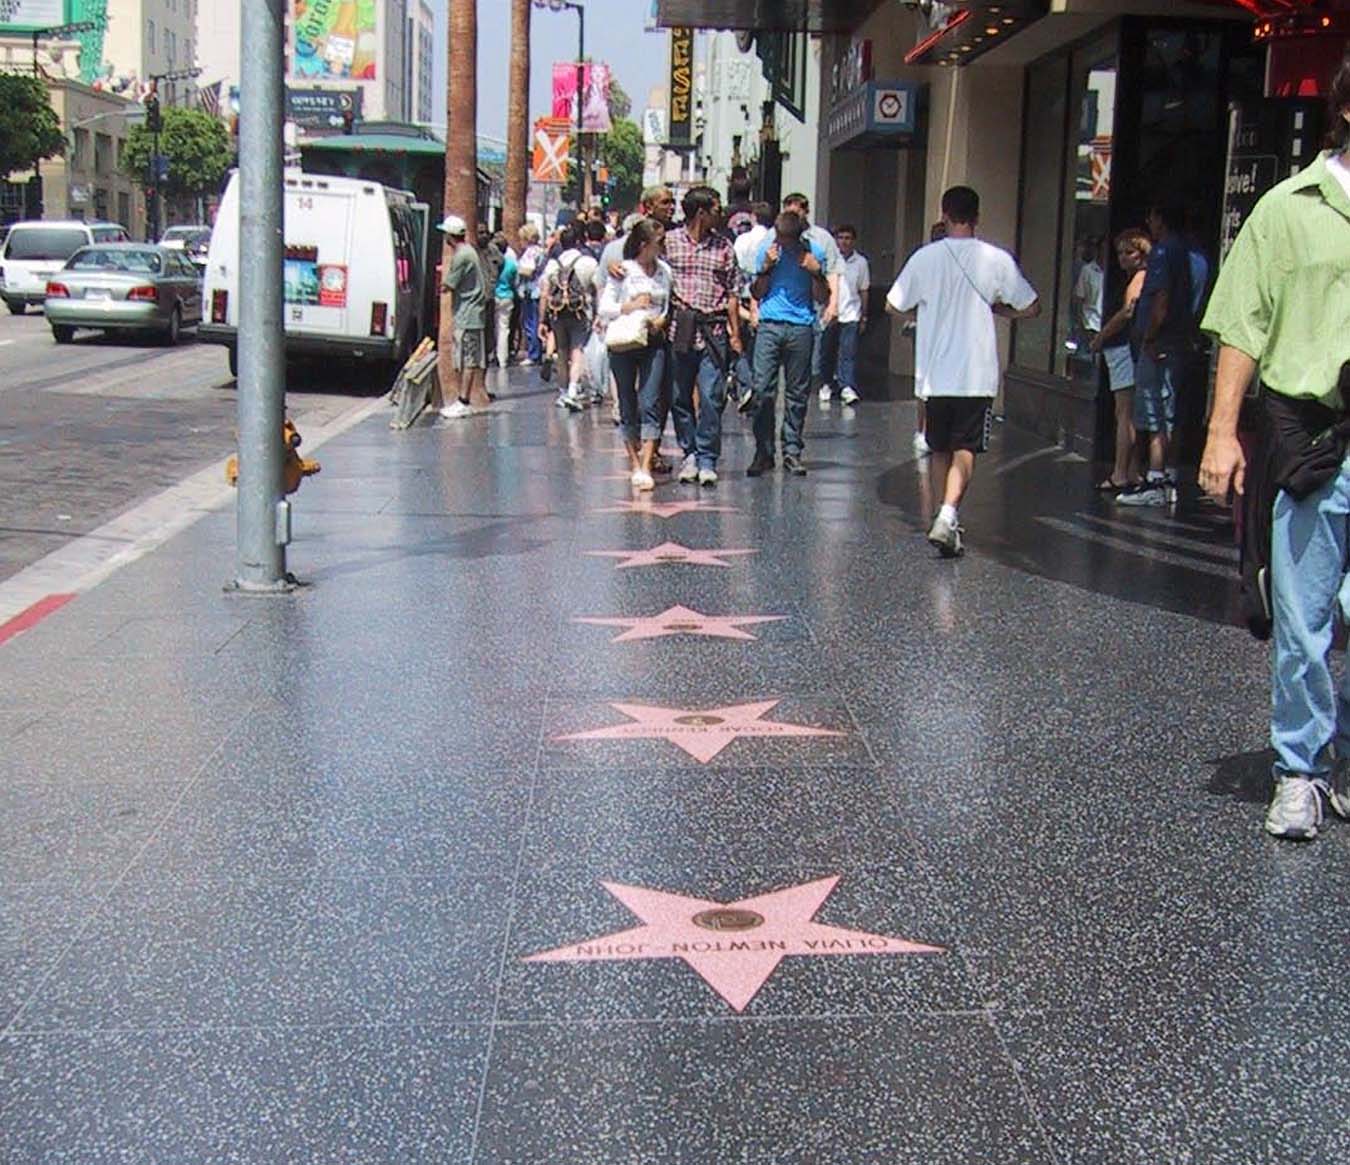 Things to Do in Los Angeles - Hollywood Walk of Fame